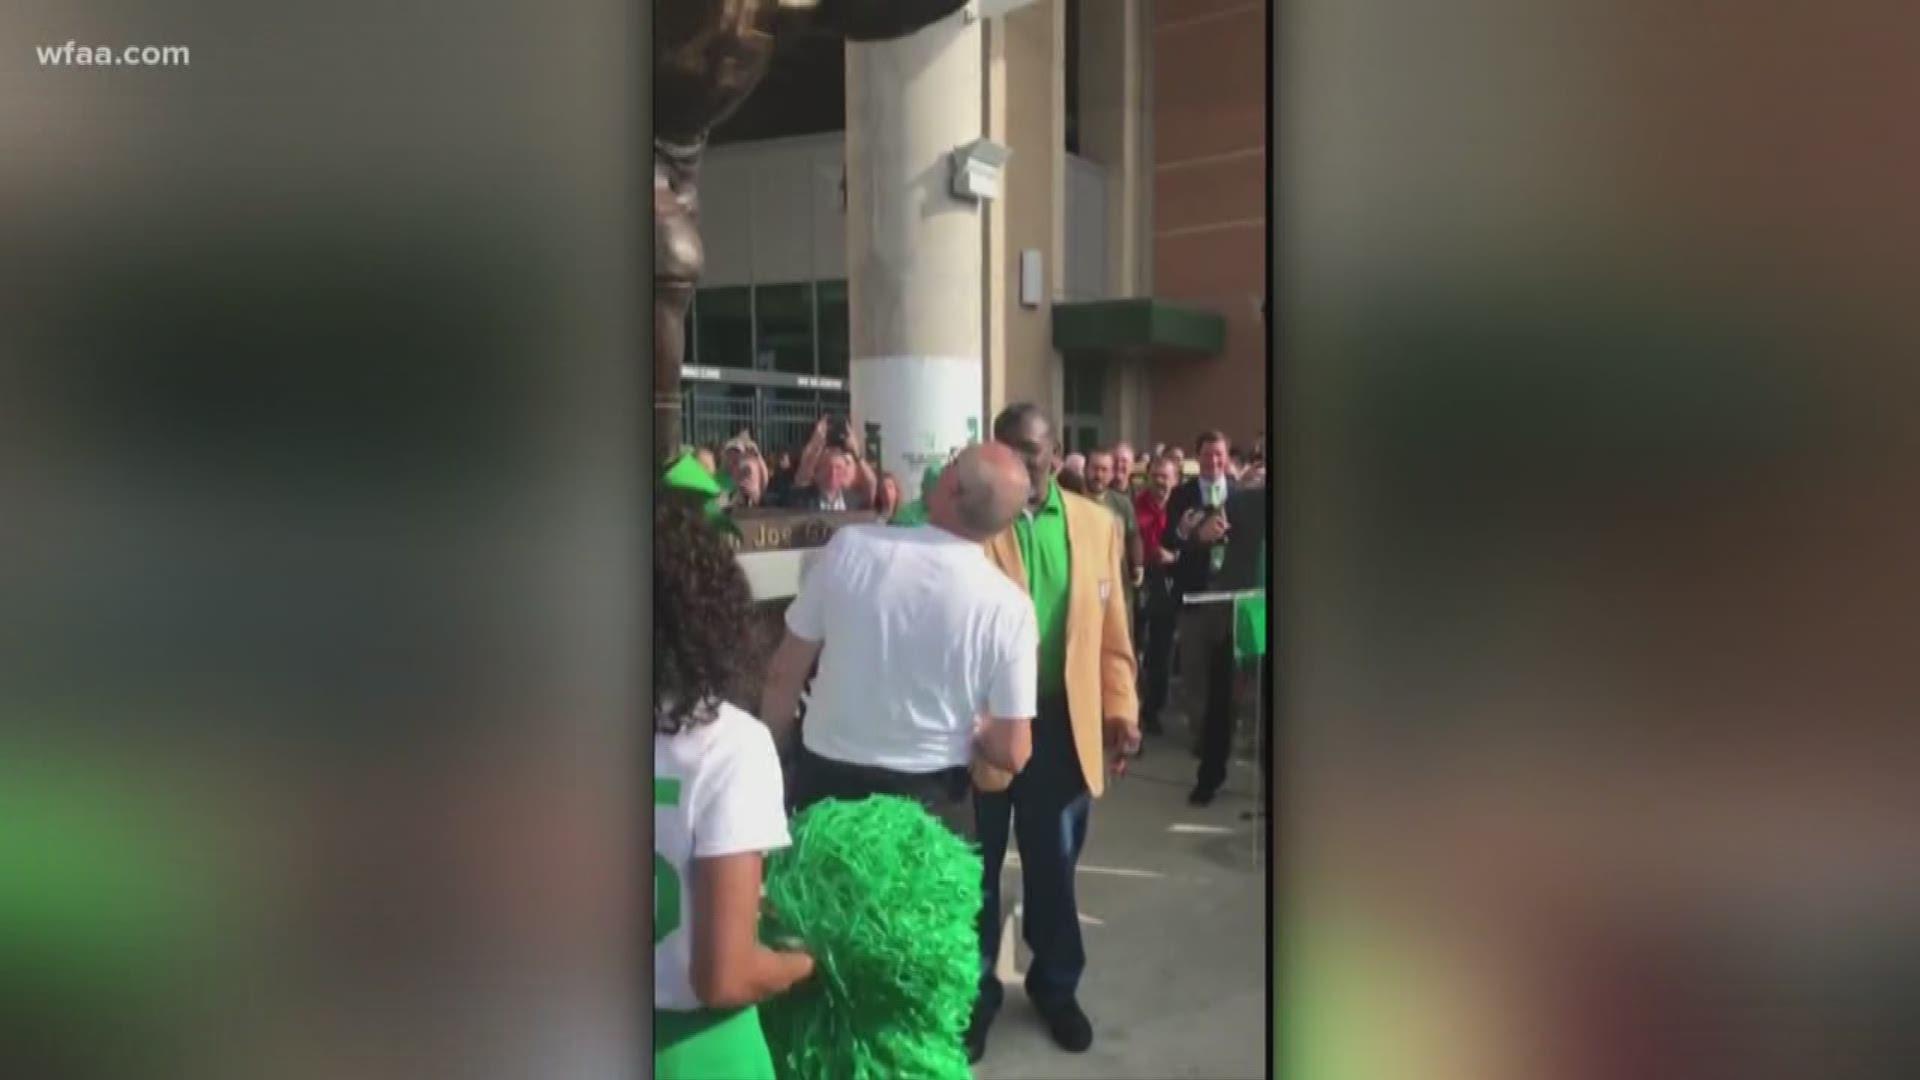 Mean Joe Green statue unveiled at UNT